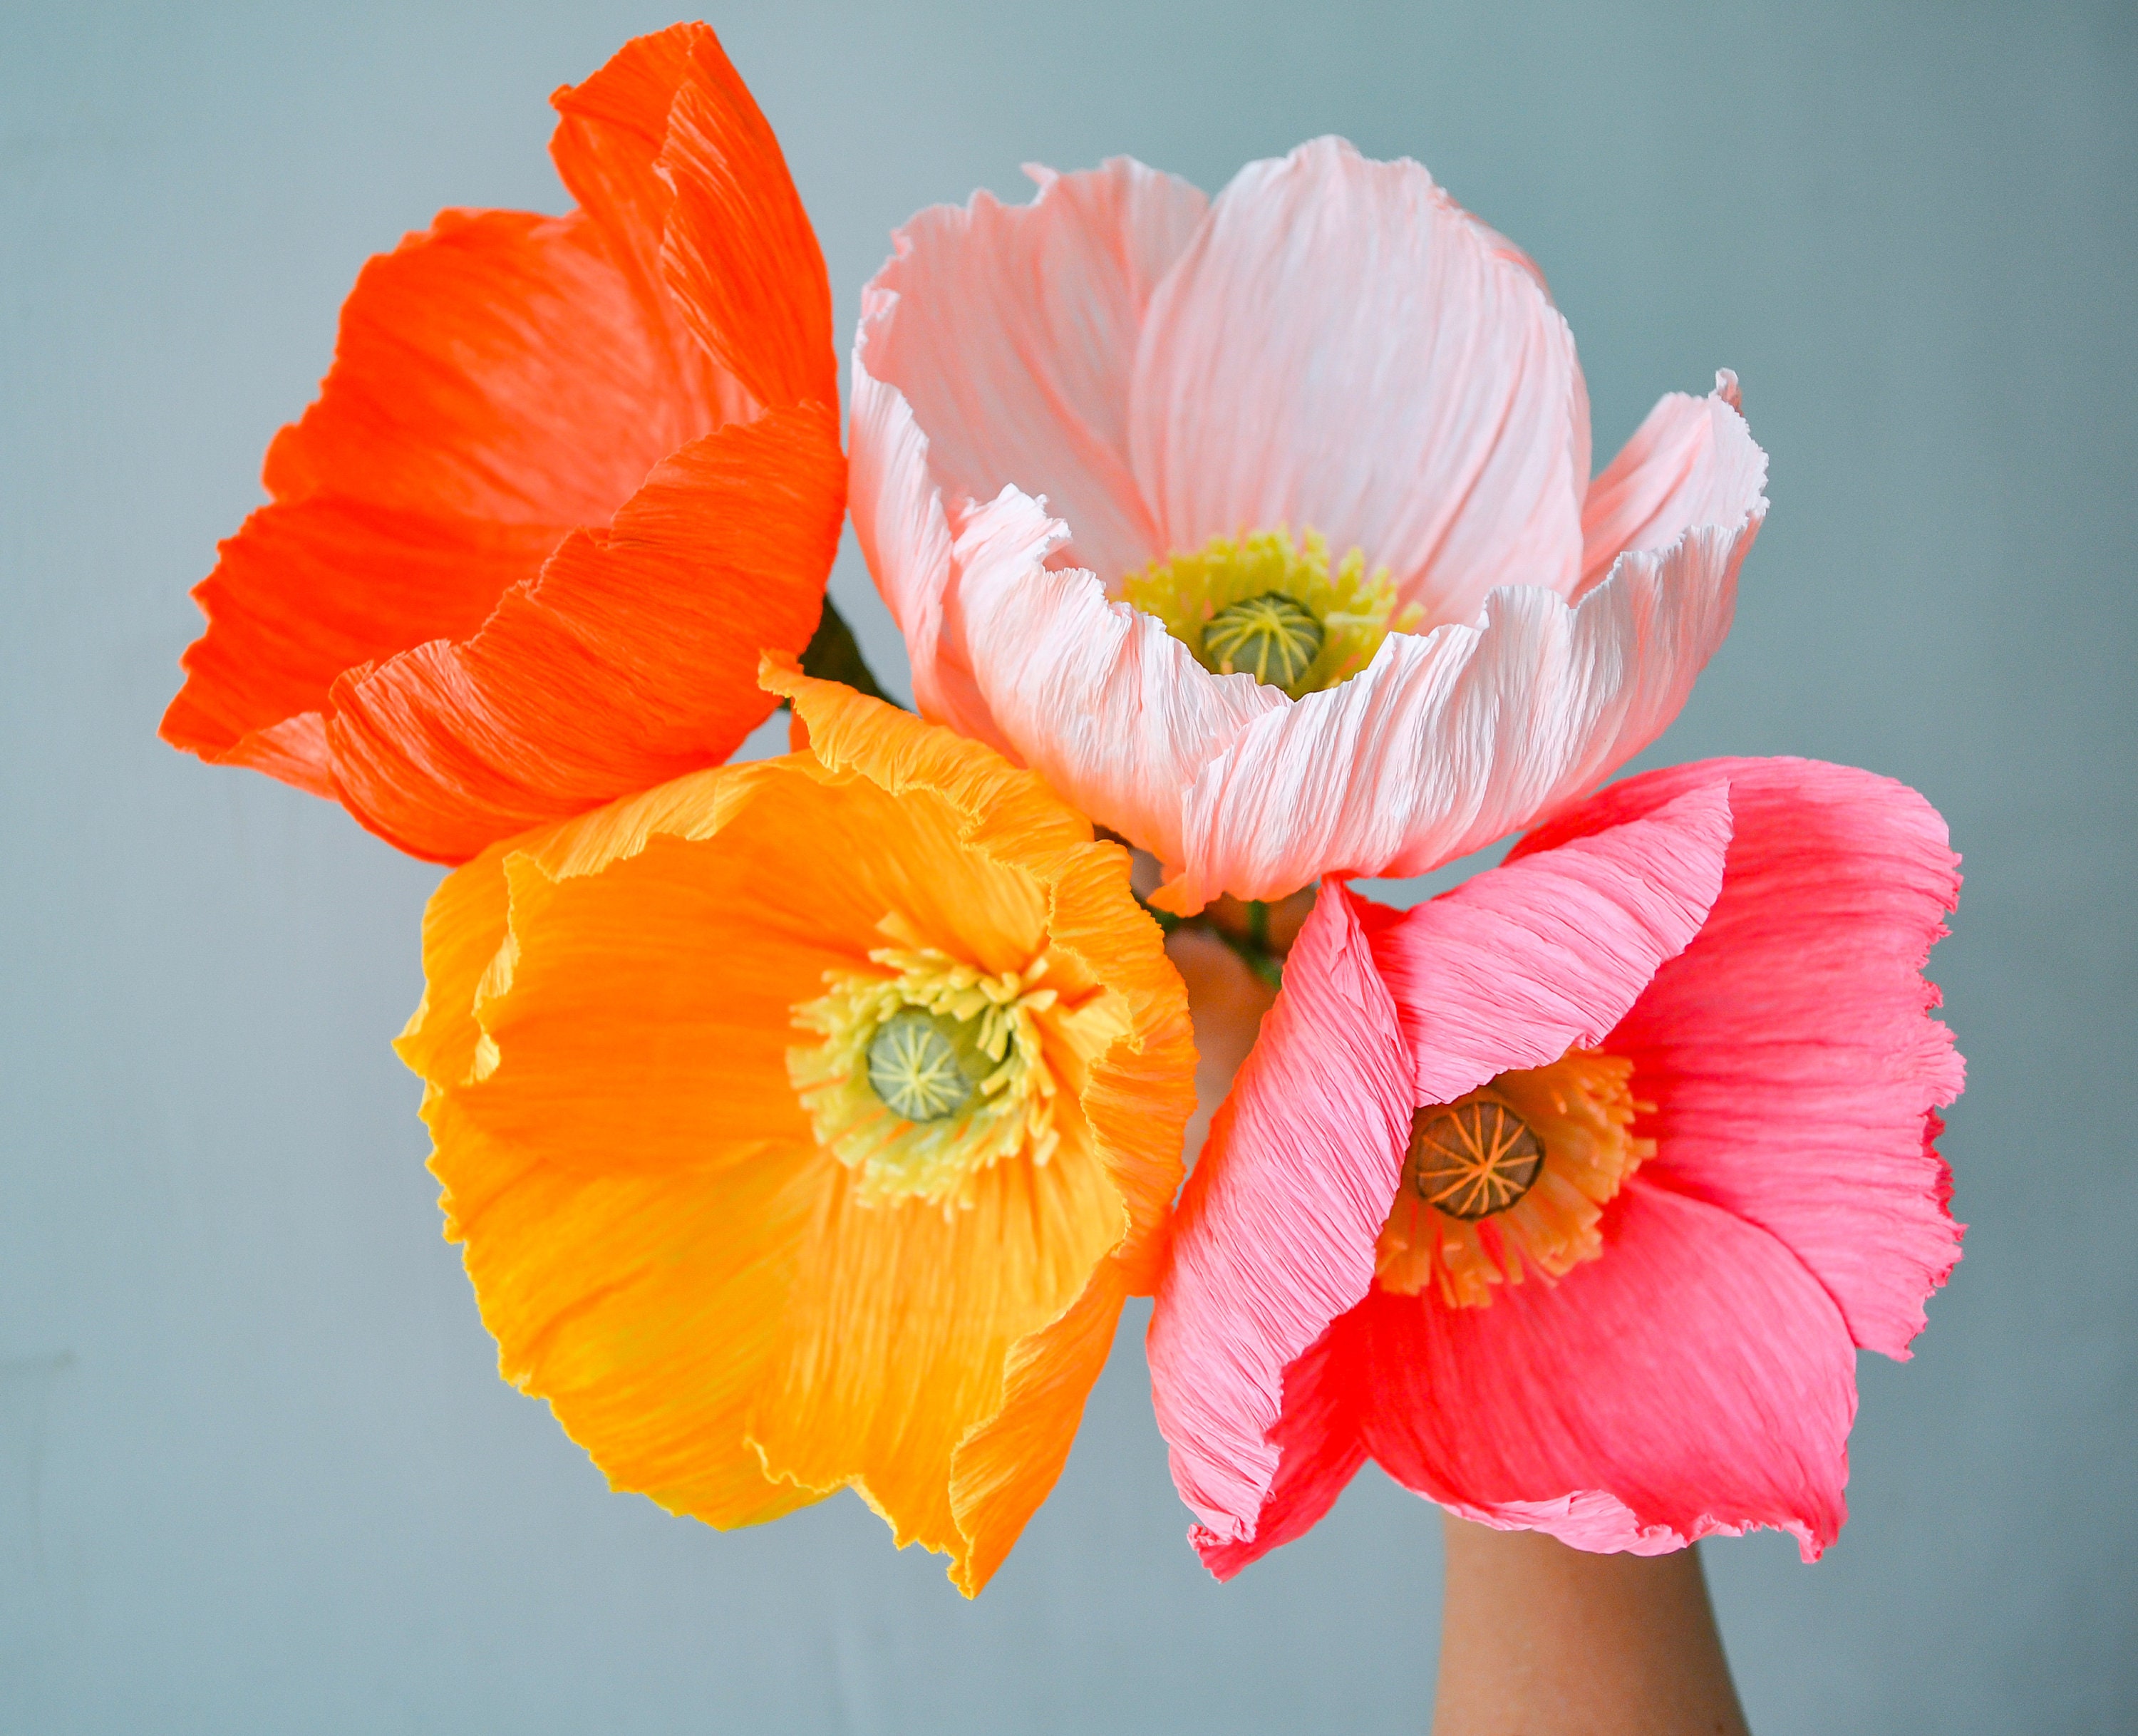 How to Make Tissue Paper Poppies - Say Yes